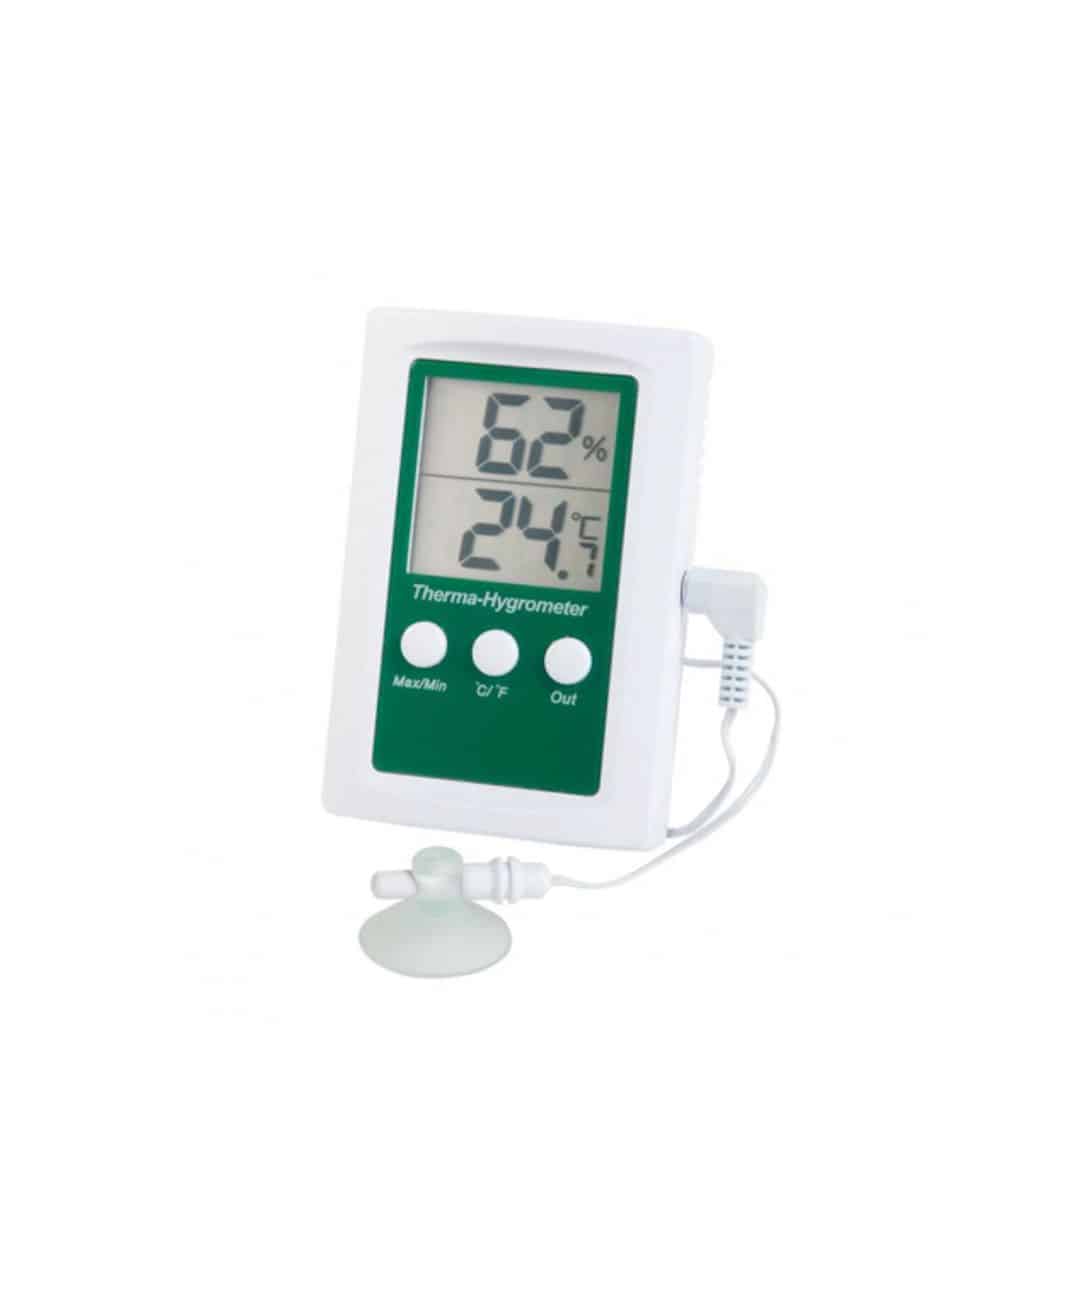 Dual Display Digital Max/Min Thermometer and Hygrometer (TMM106H)